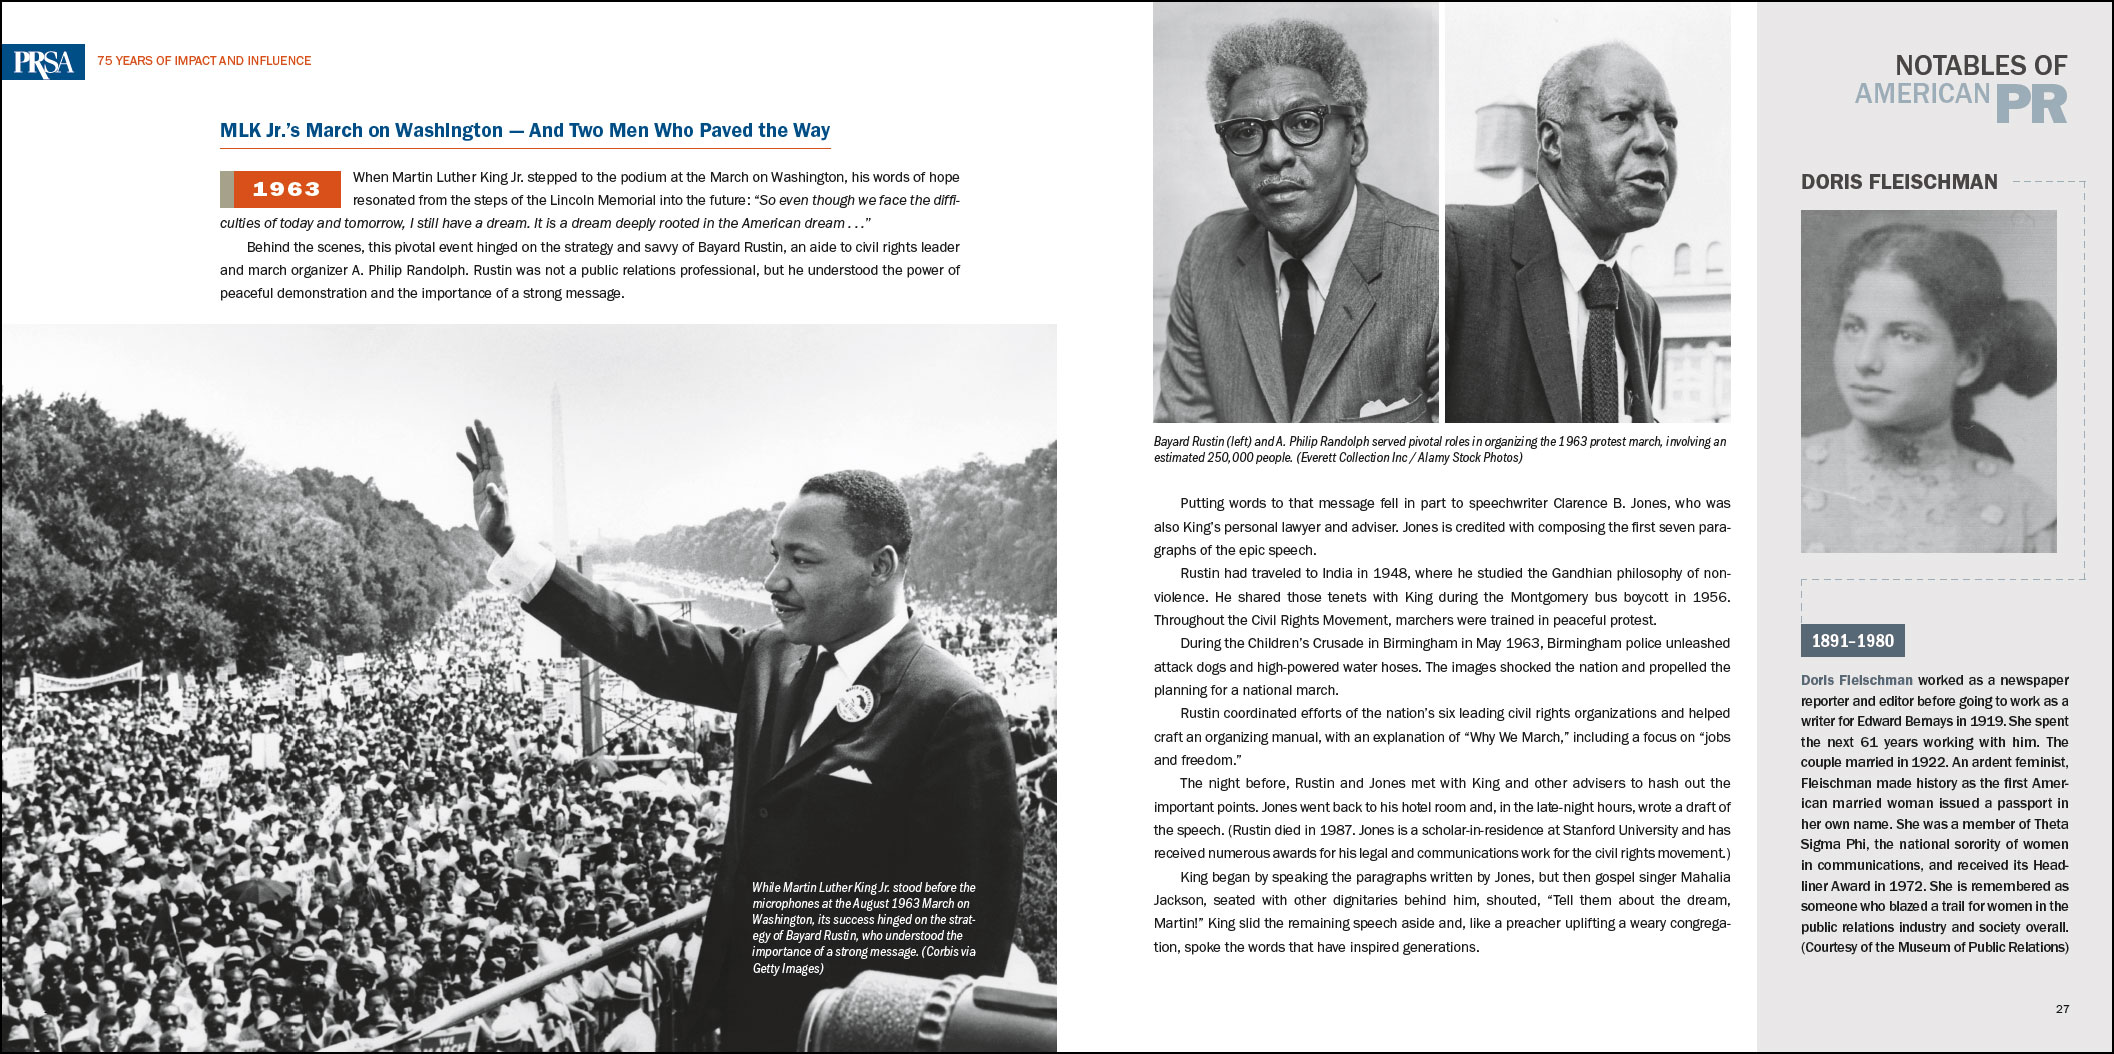 book spread with Martin Luther King